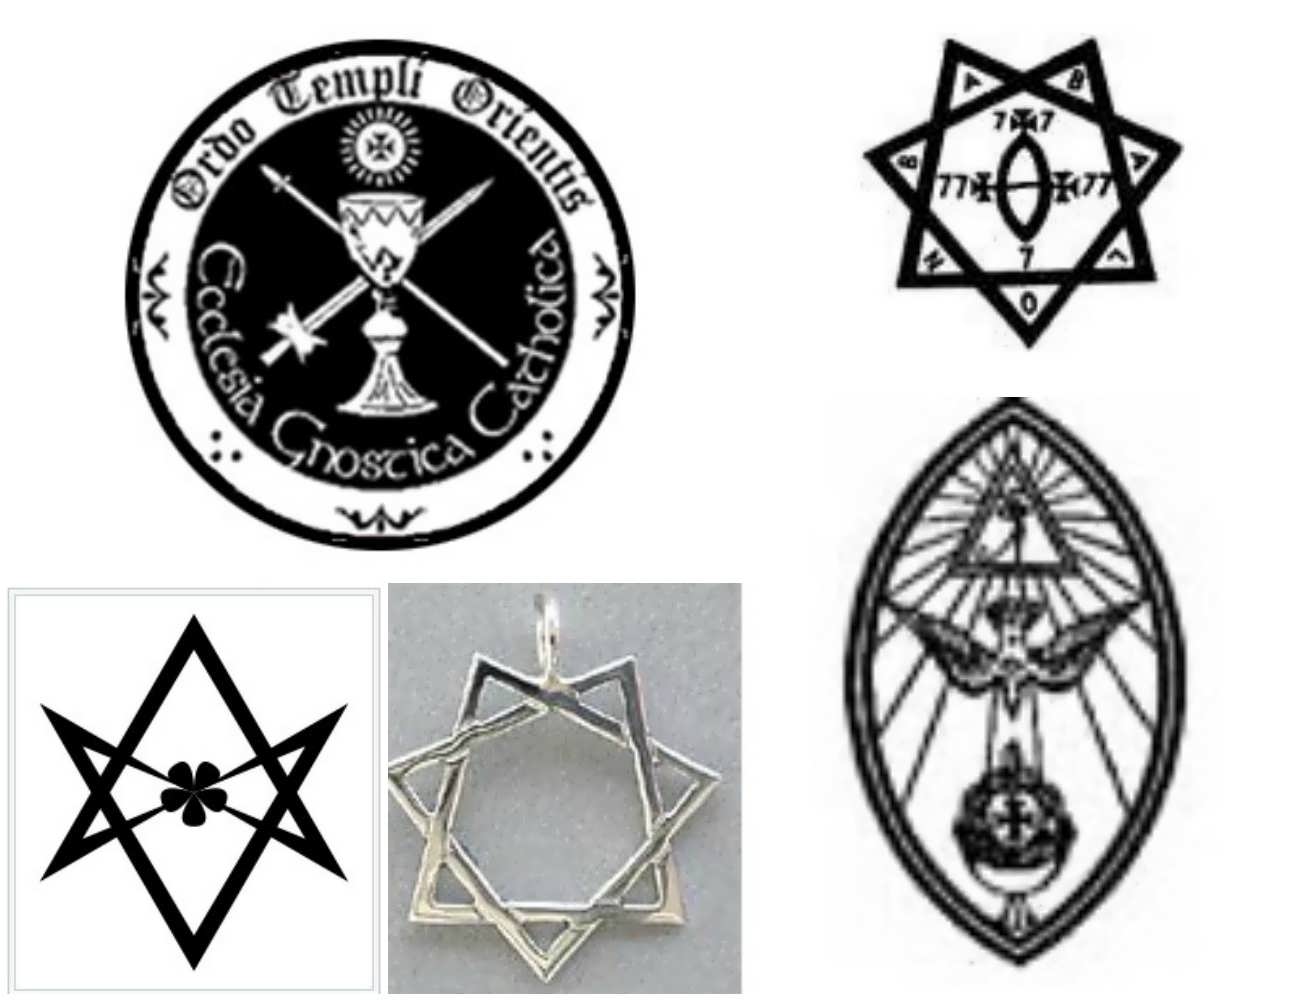 https://www.ancient-symbols.com/images/collages/1300-1000/thelema.jpg